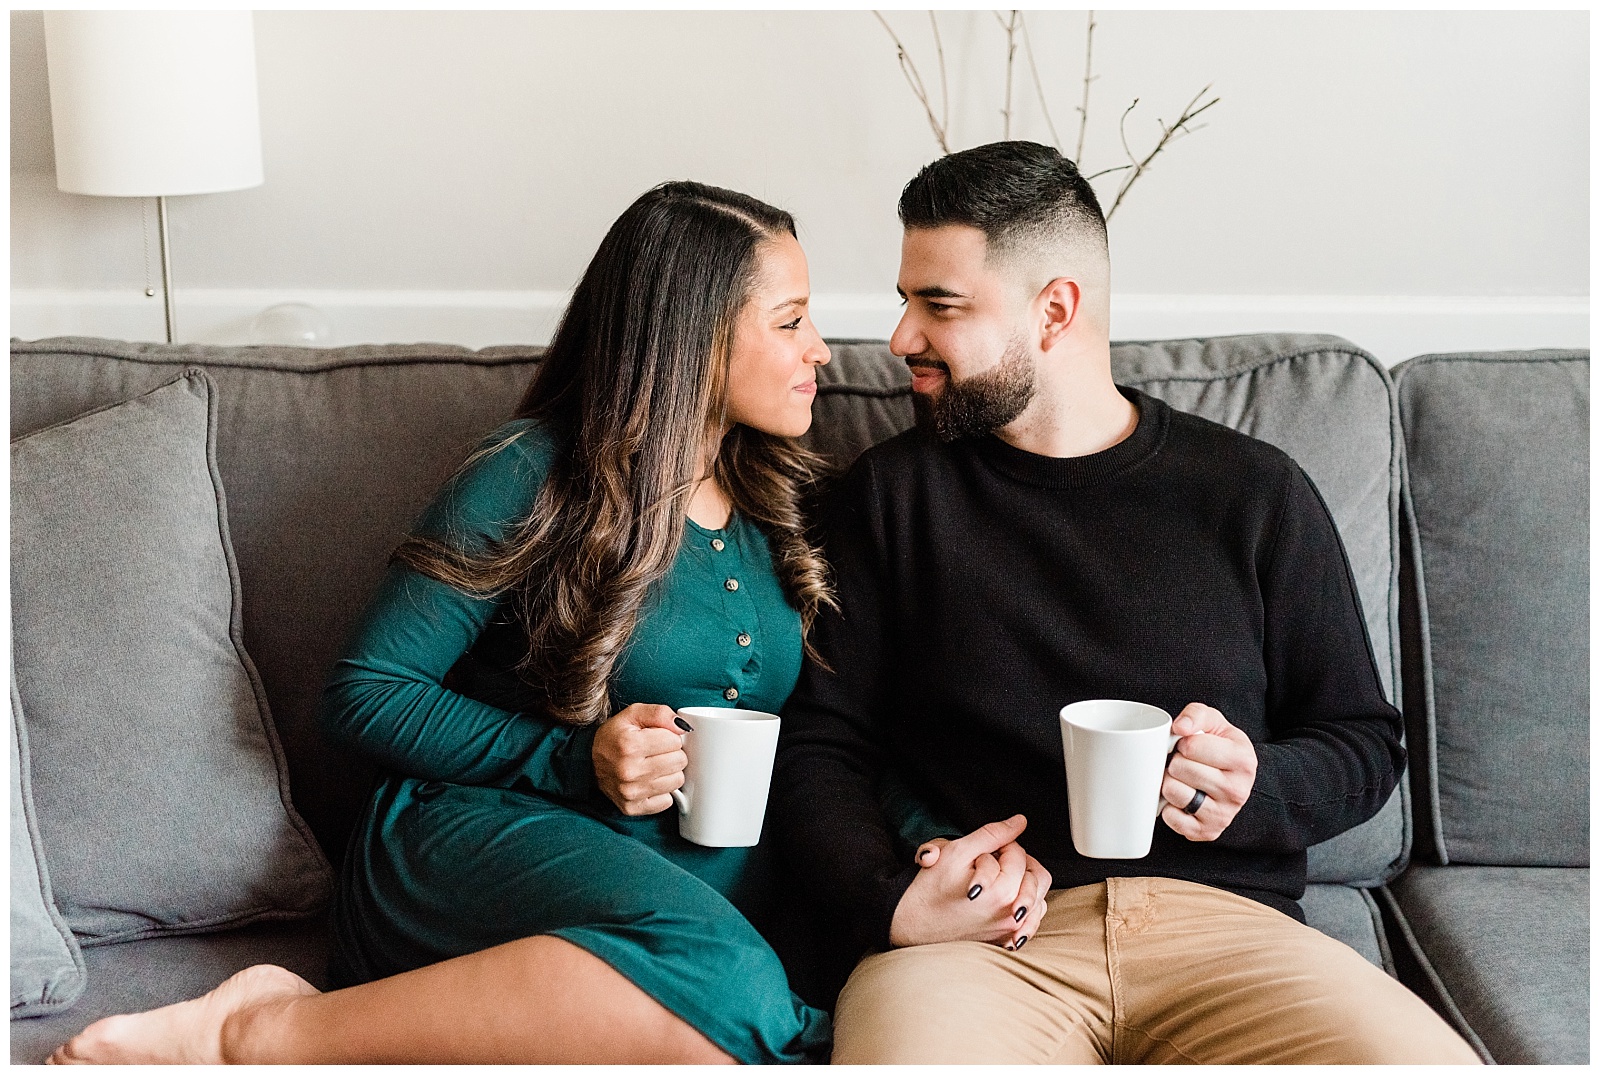 In Home Maternity Session, Nursery, Baby, New Parents, Maternity Shoot, Pregnant, Pregnancy Photos, New Jersey, Photographer, Baby Boy, Couch, coffee,, Photo